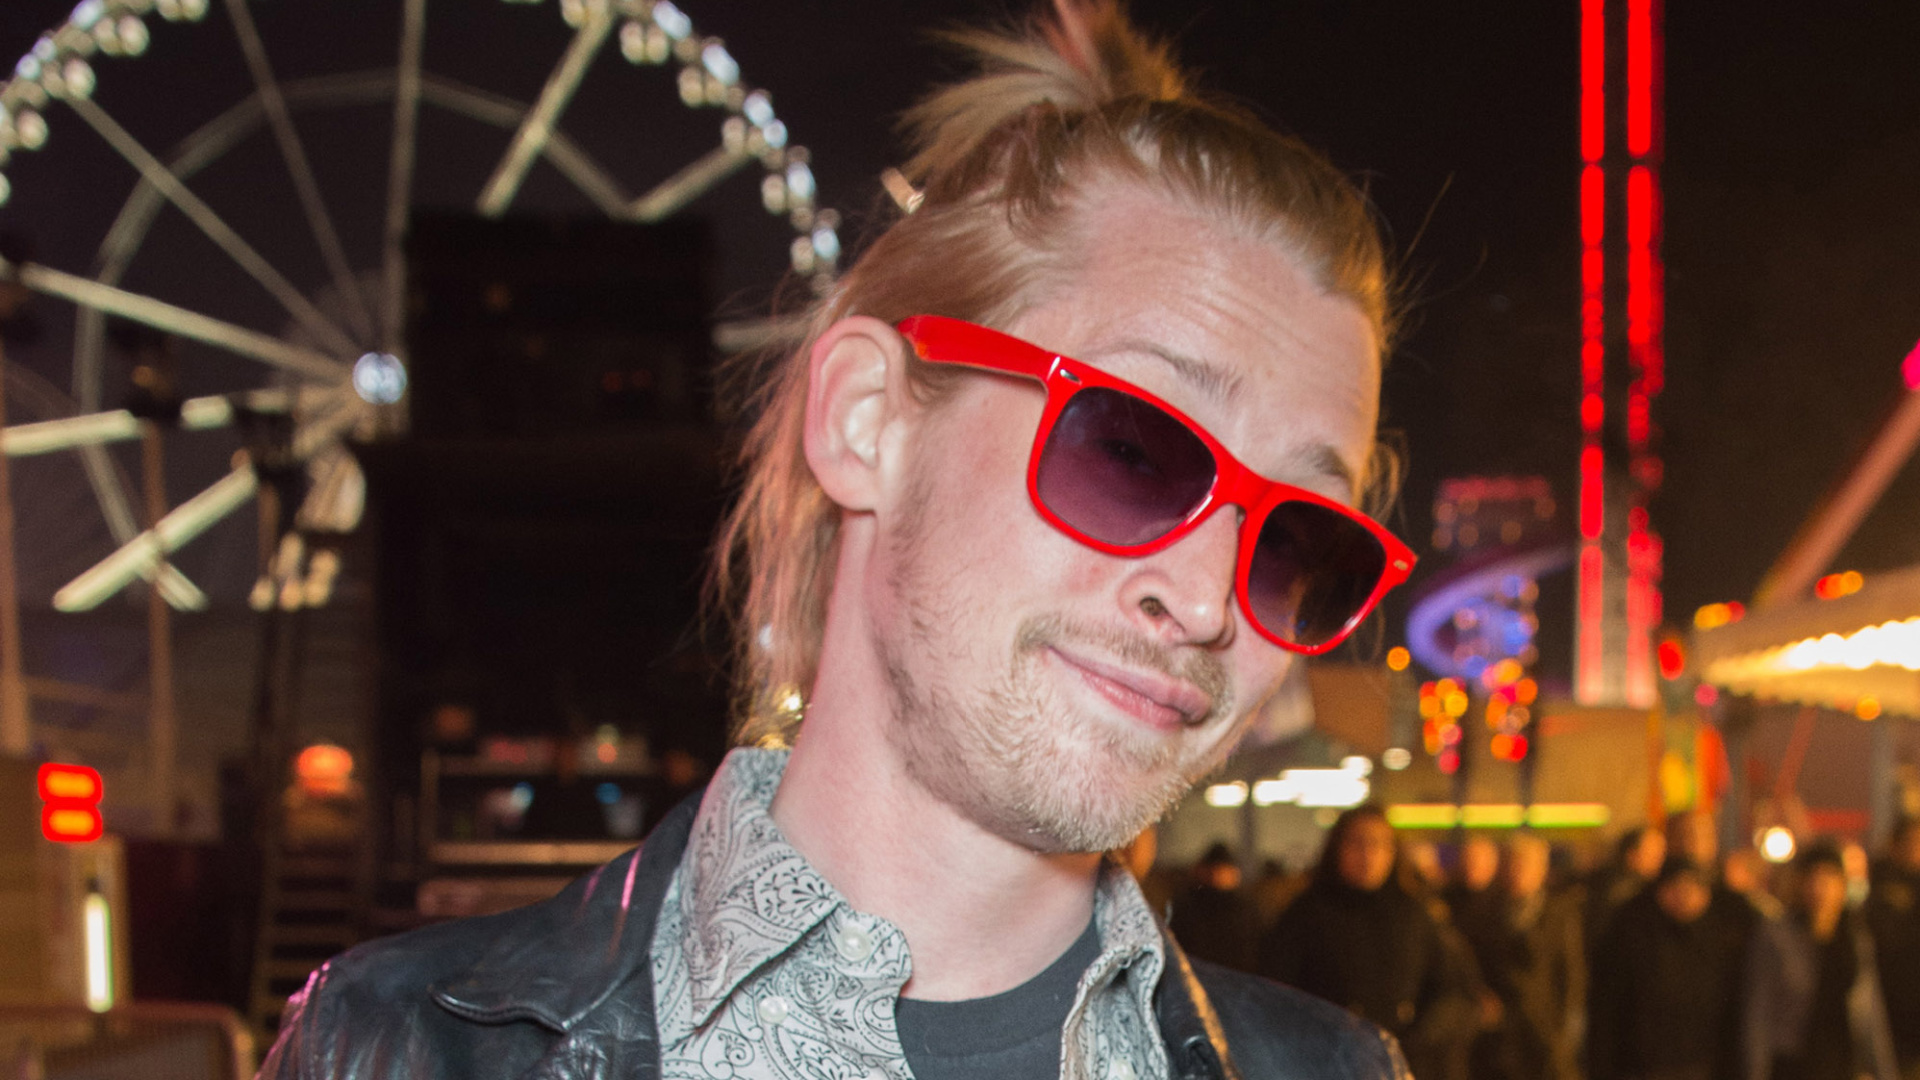 Macaulay Culkin at 'mid life': see how the actor is doing today!